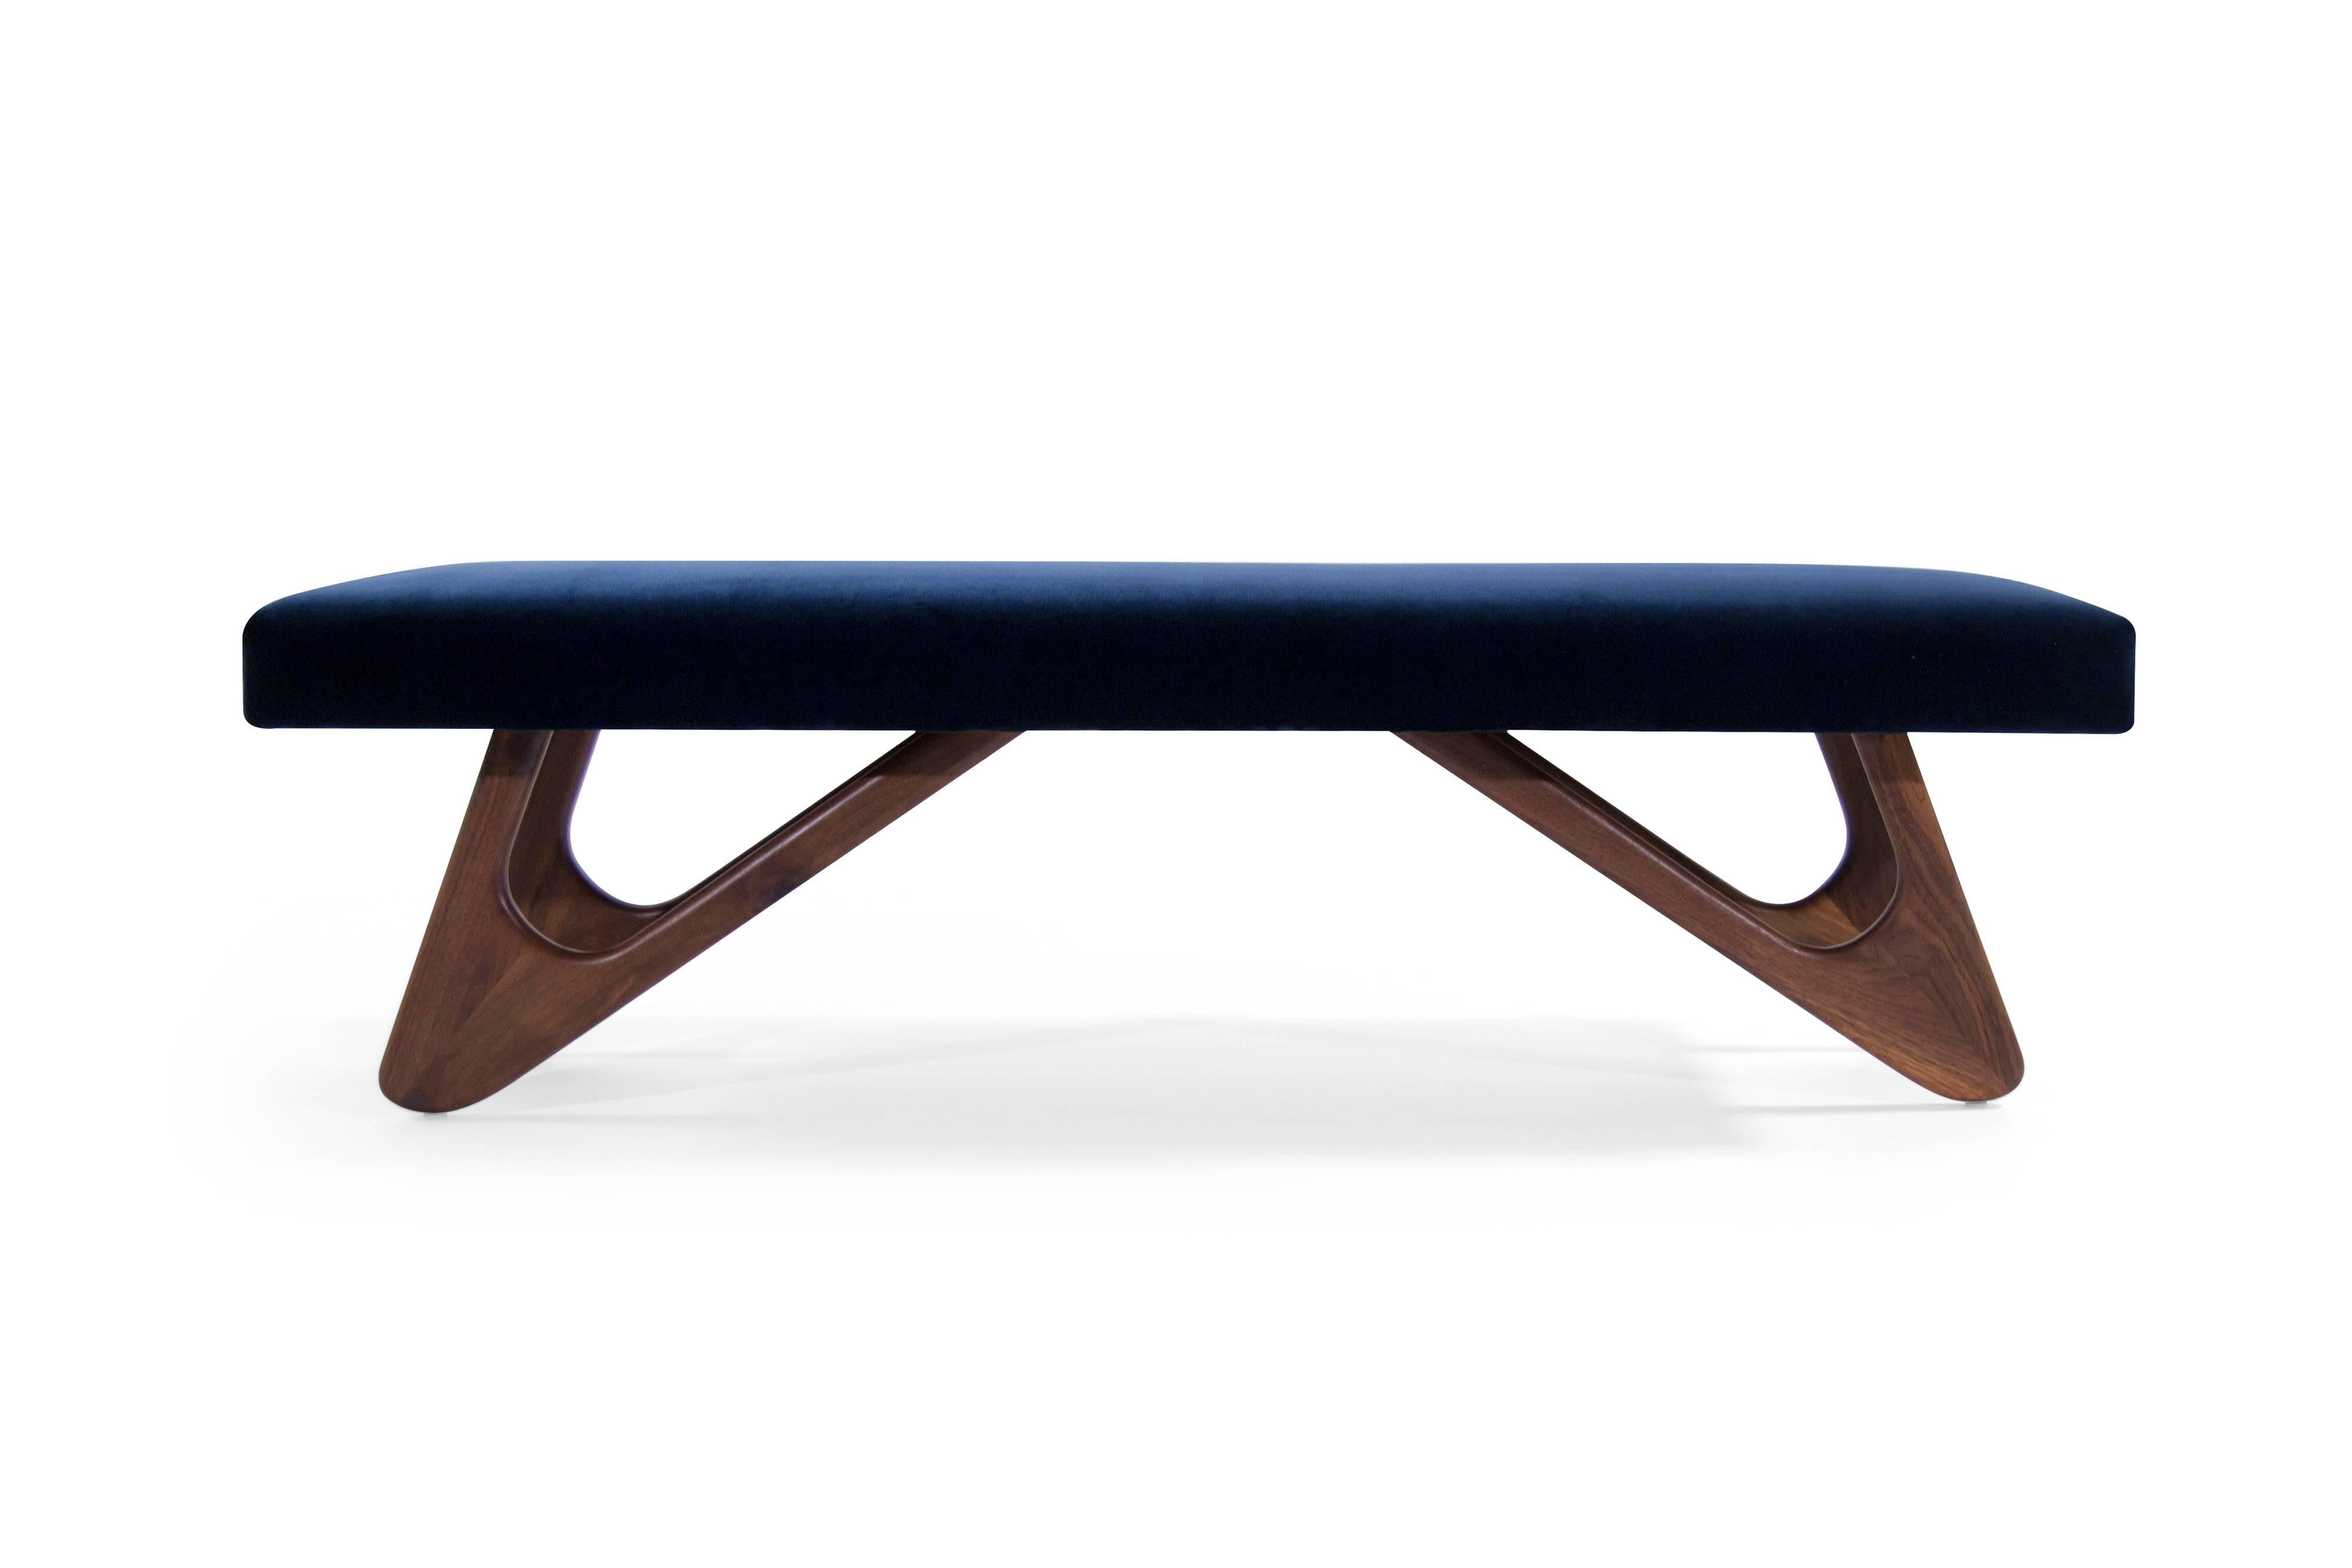 Phenomenal bench by Adrian Pearsall newly recovered in navy blue velvet. Boomerang shaped walnut legs have been fully restored.